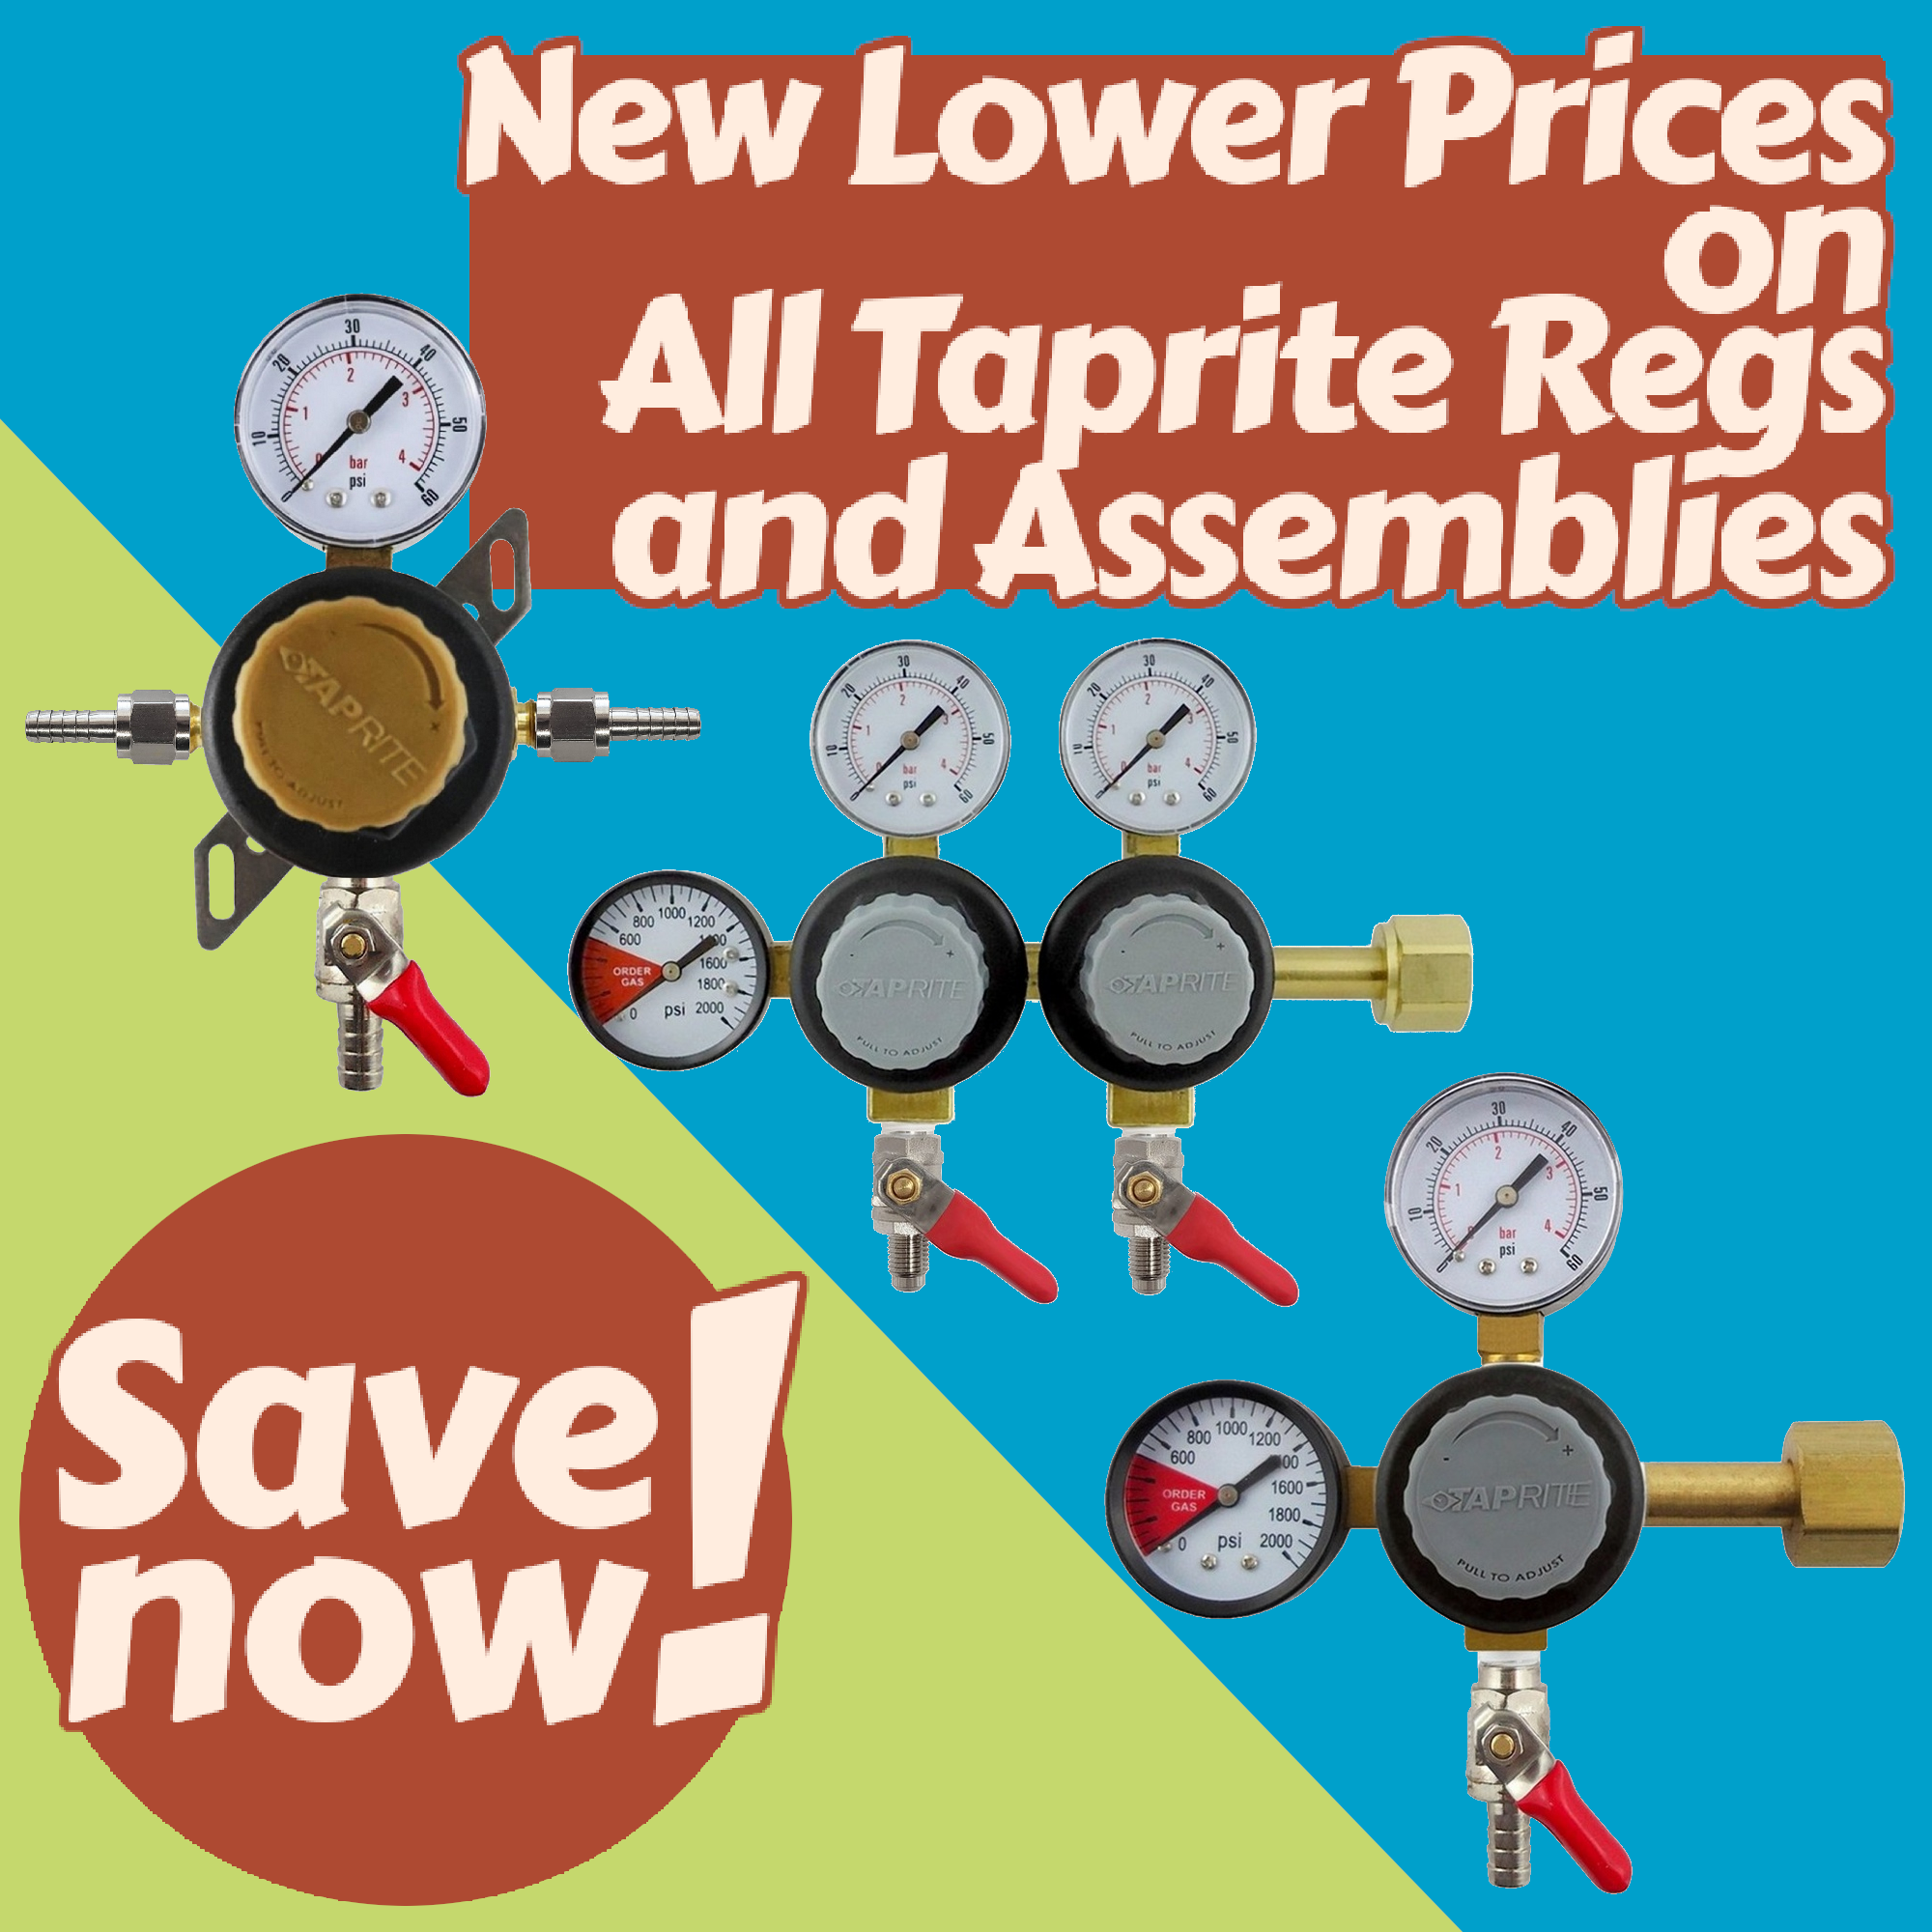 New Lower Prices on Taprite Regs